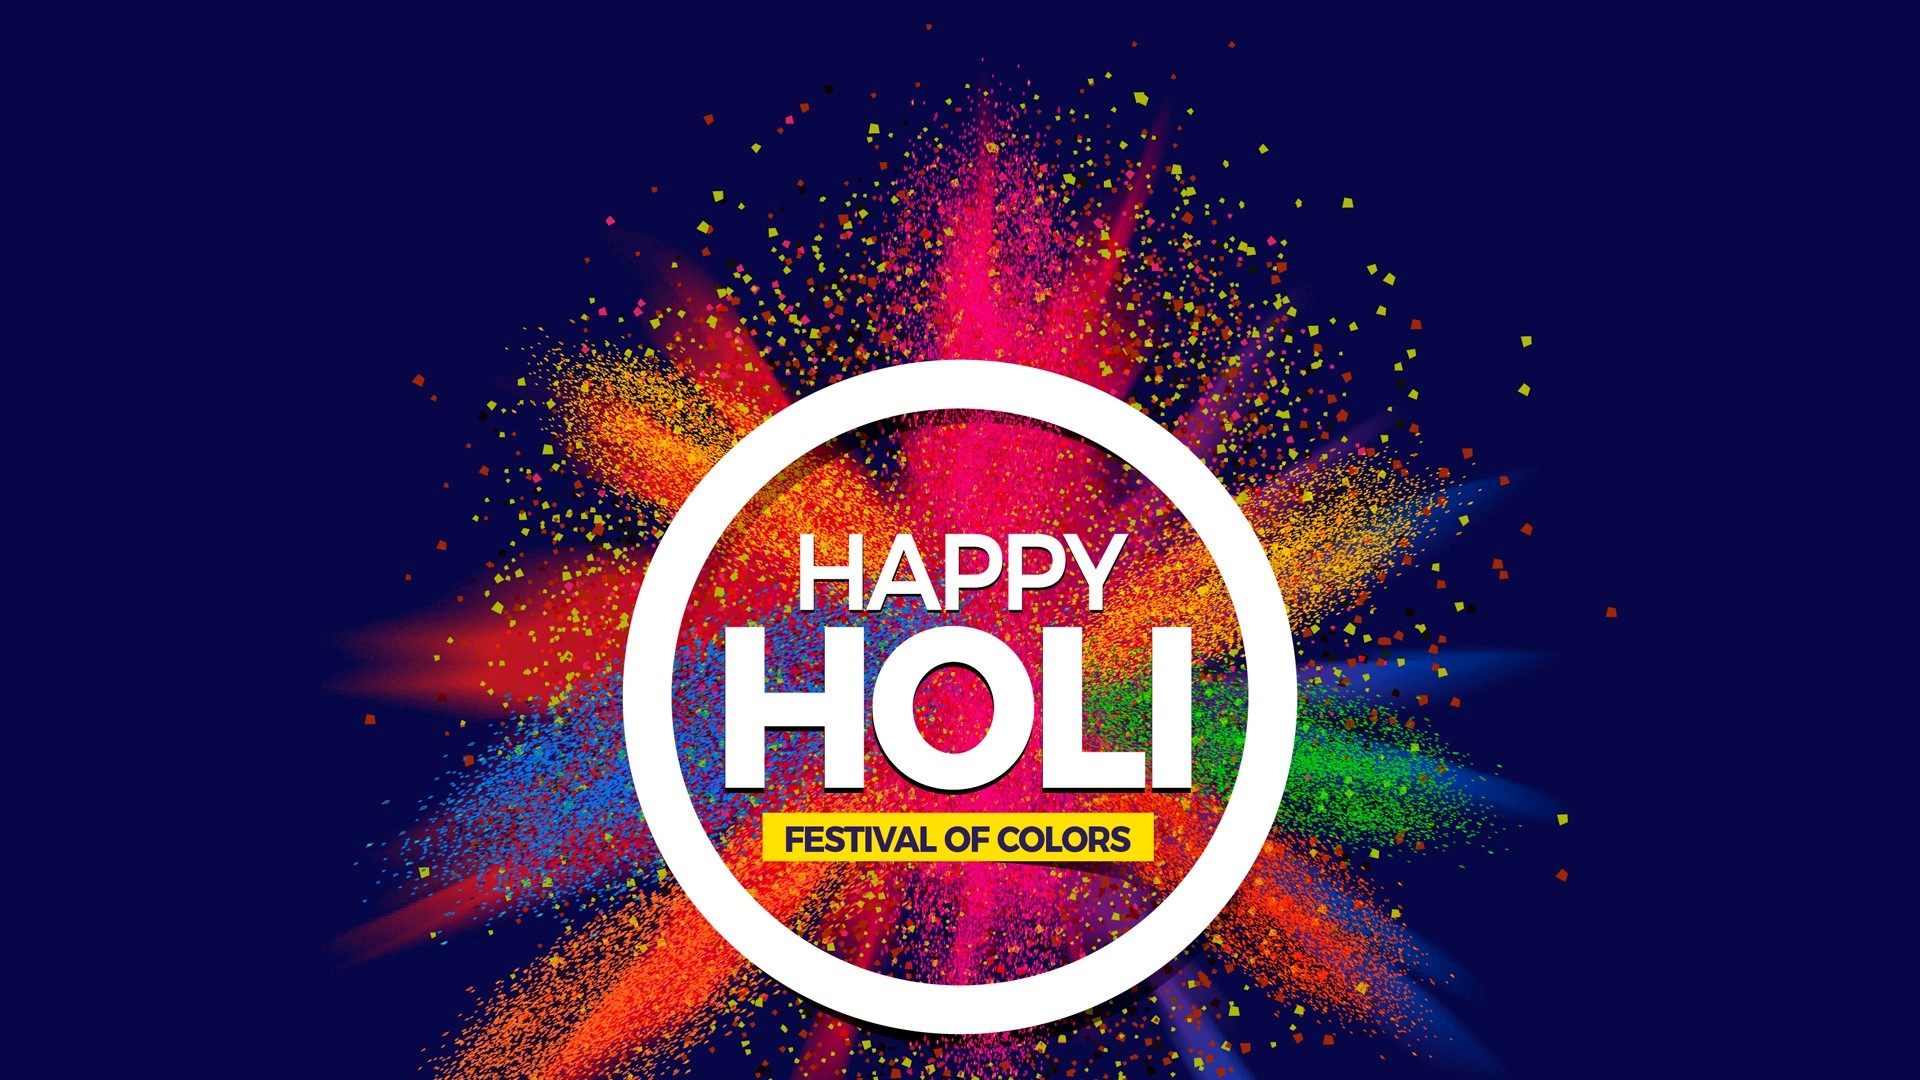 Animated Holi Hd Wallpapers Free Download - God HD Wallpapers